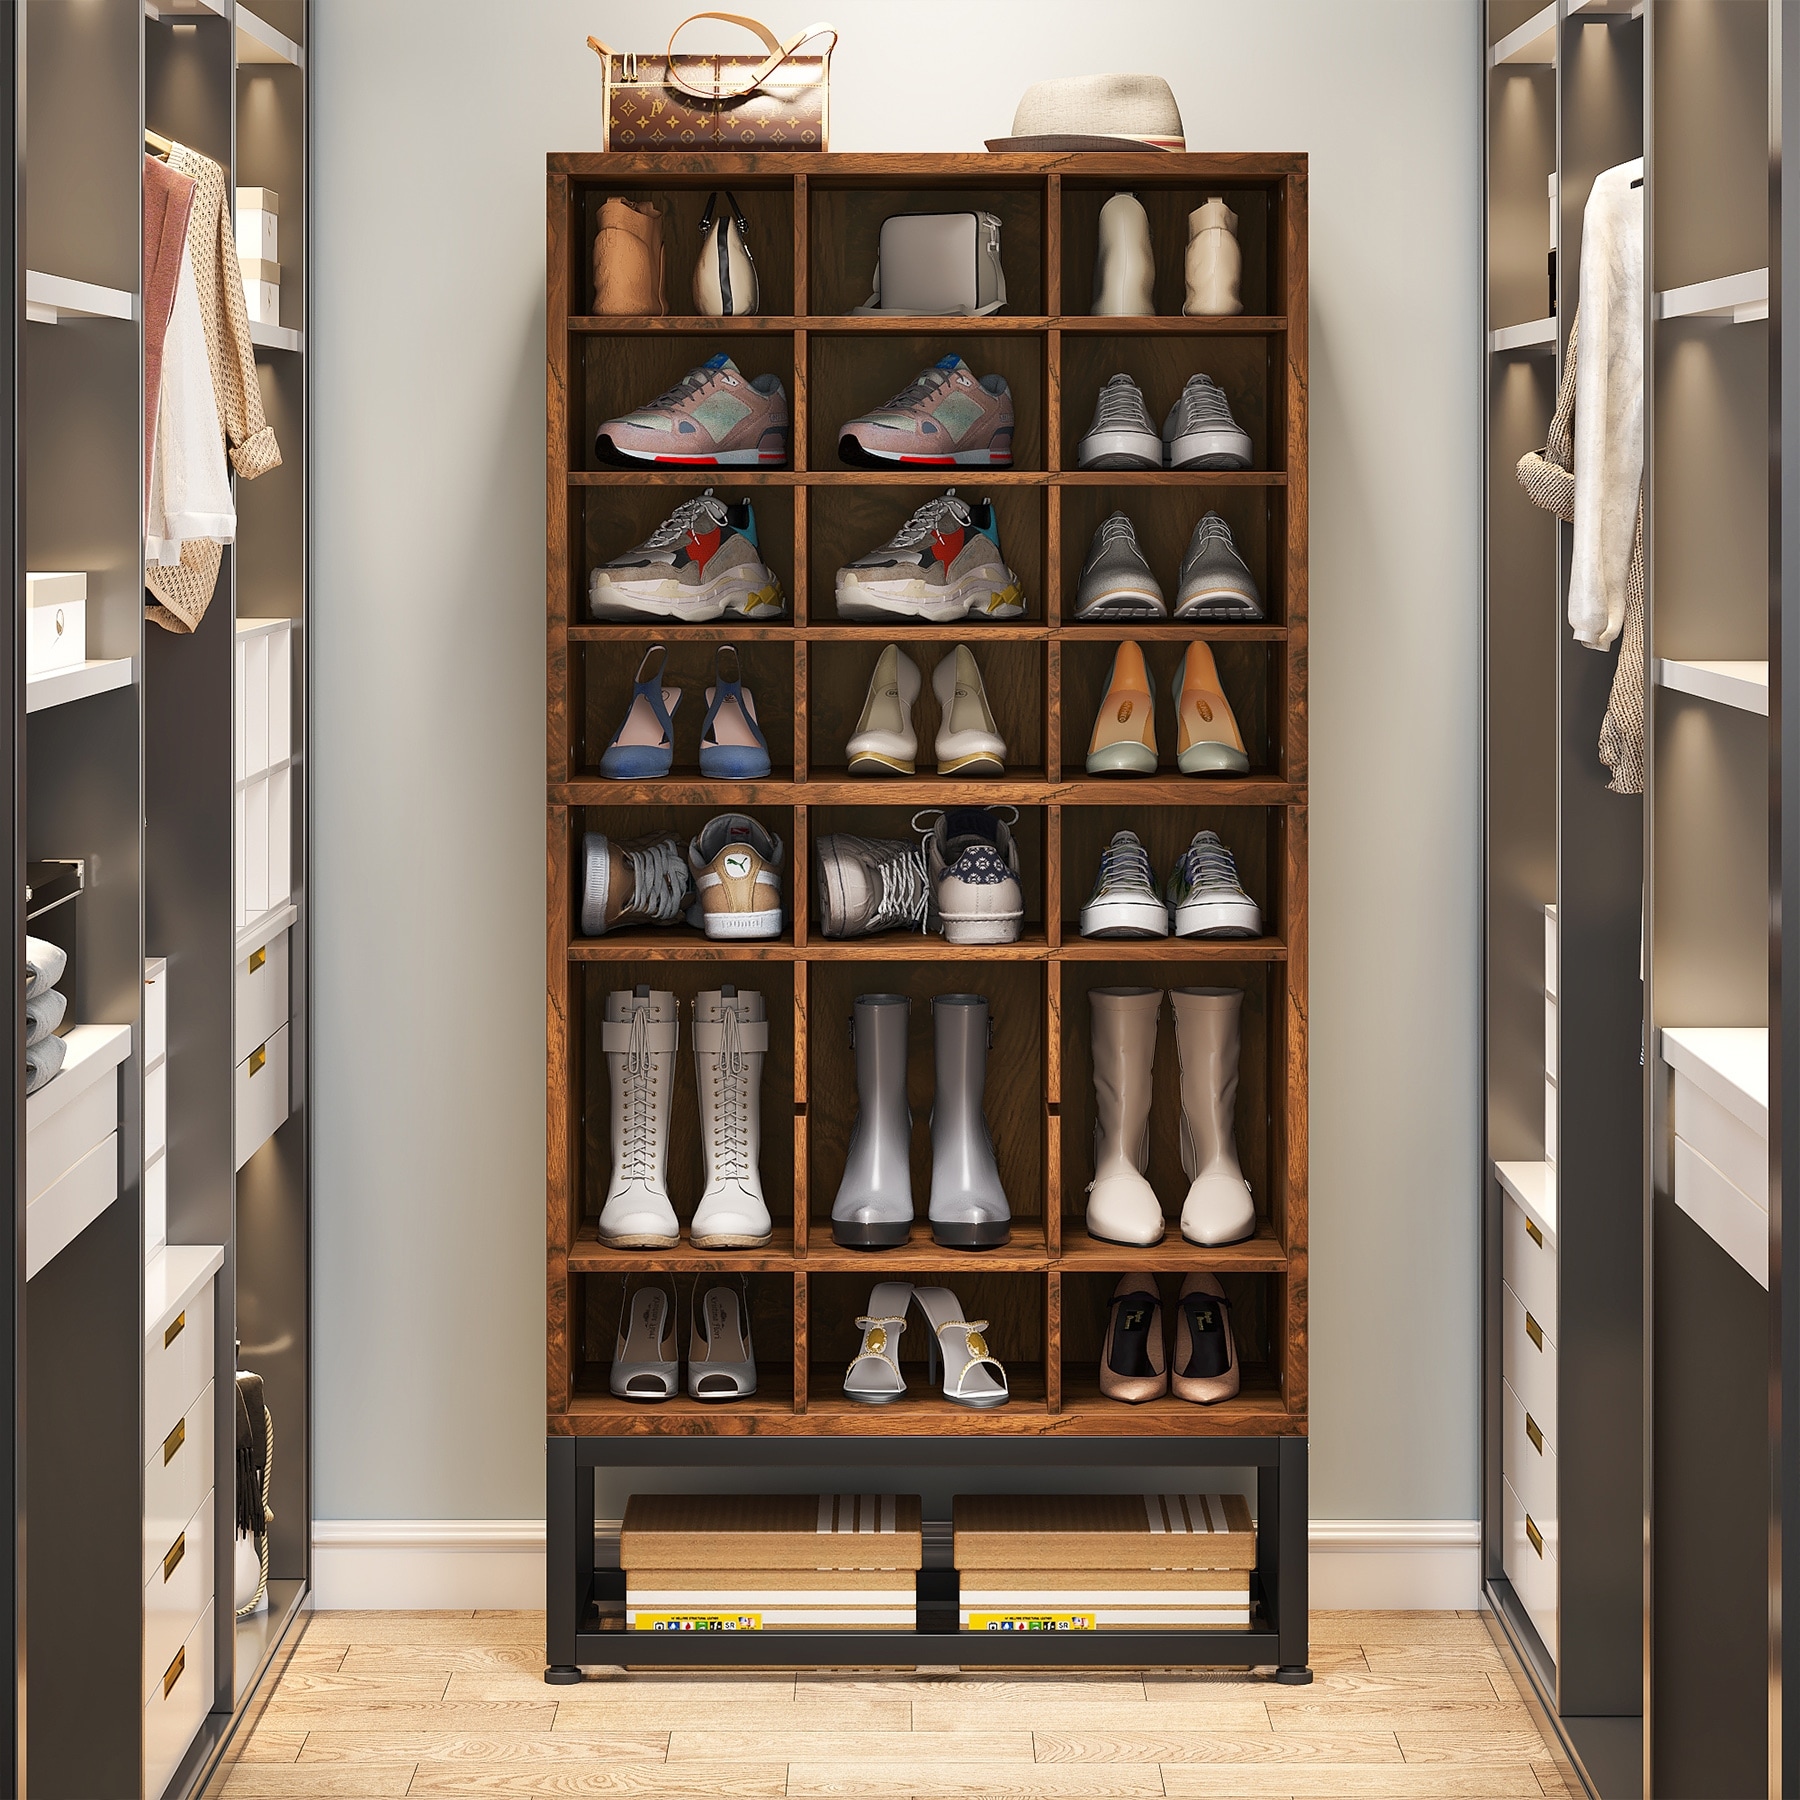 https://ak1.ostkcdn.com/images/products/is/images/direct/ab23fe131988d771c529706860b1b947b913c527/Shoe-Storage-Rack%2C-24-Pair-Shoe-Storage-Cabinet-for-Entryway.jpg